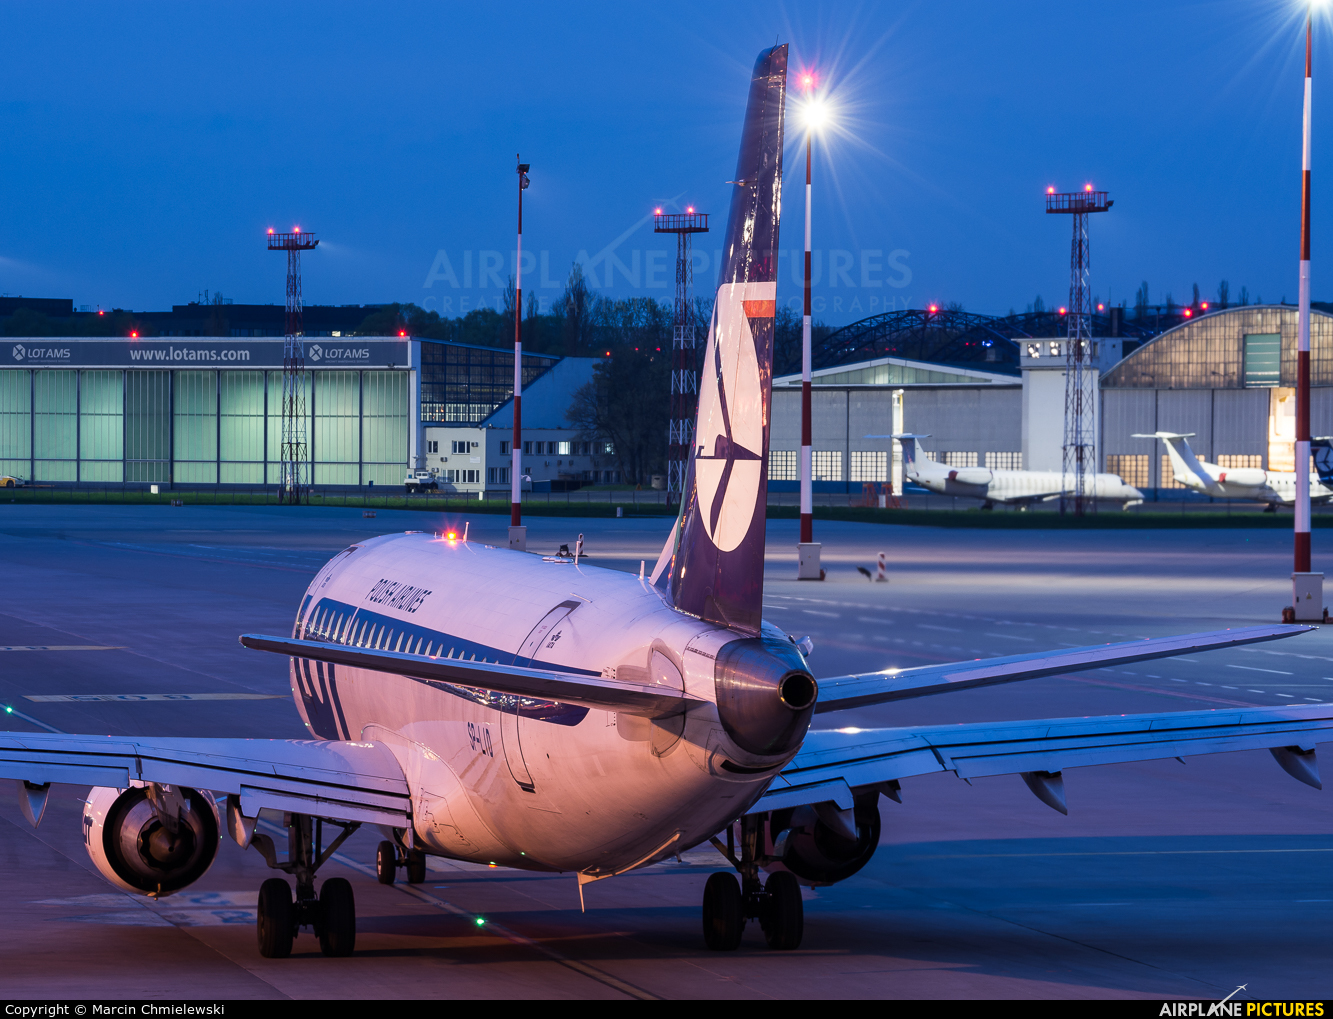 LOT - Polish Airlines SP-LID aircraft at Warsaw - Frederic Chopin